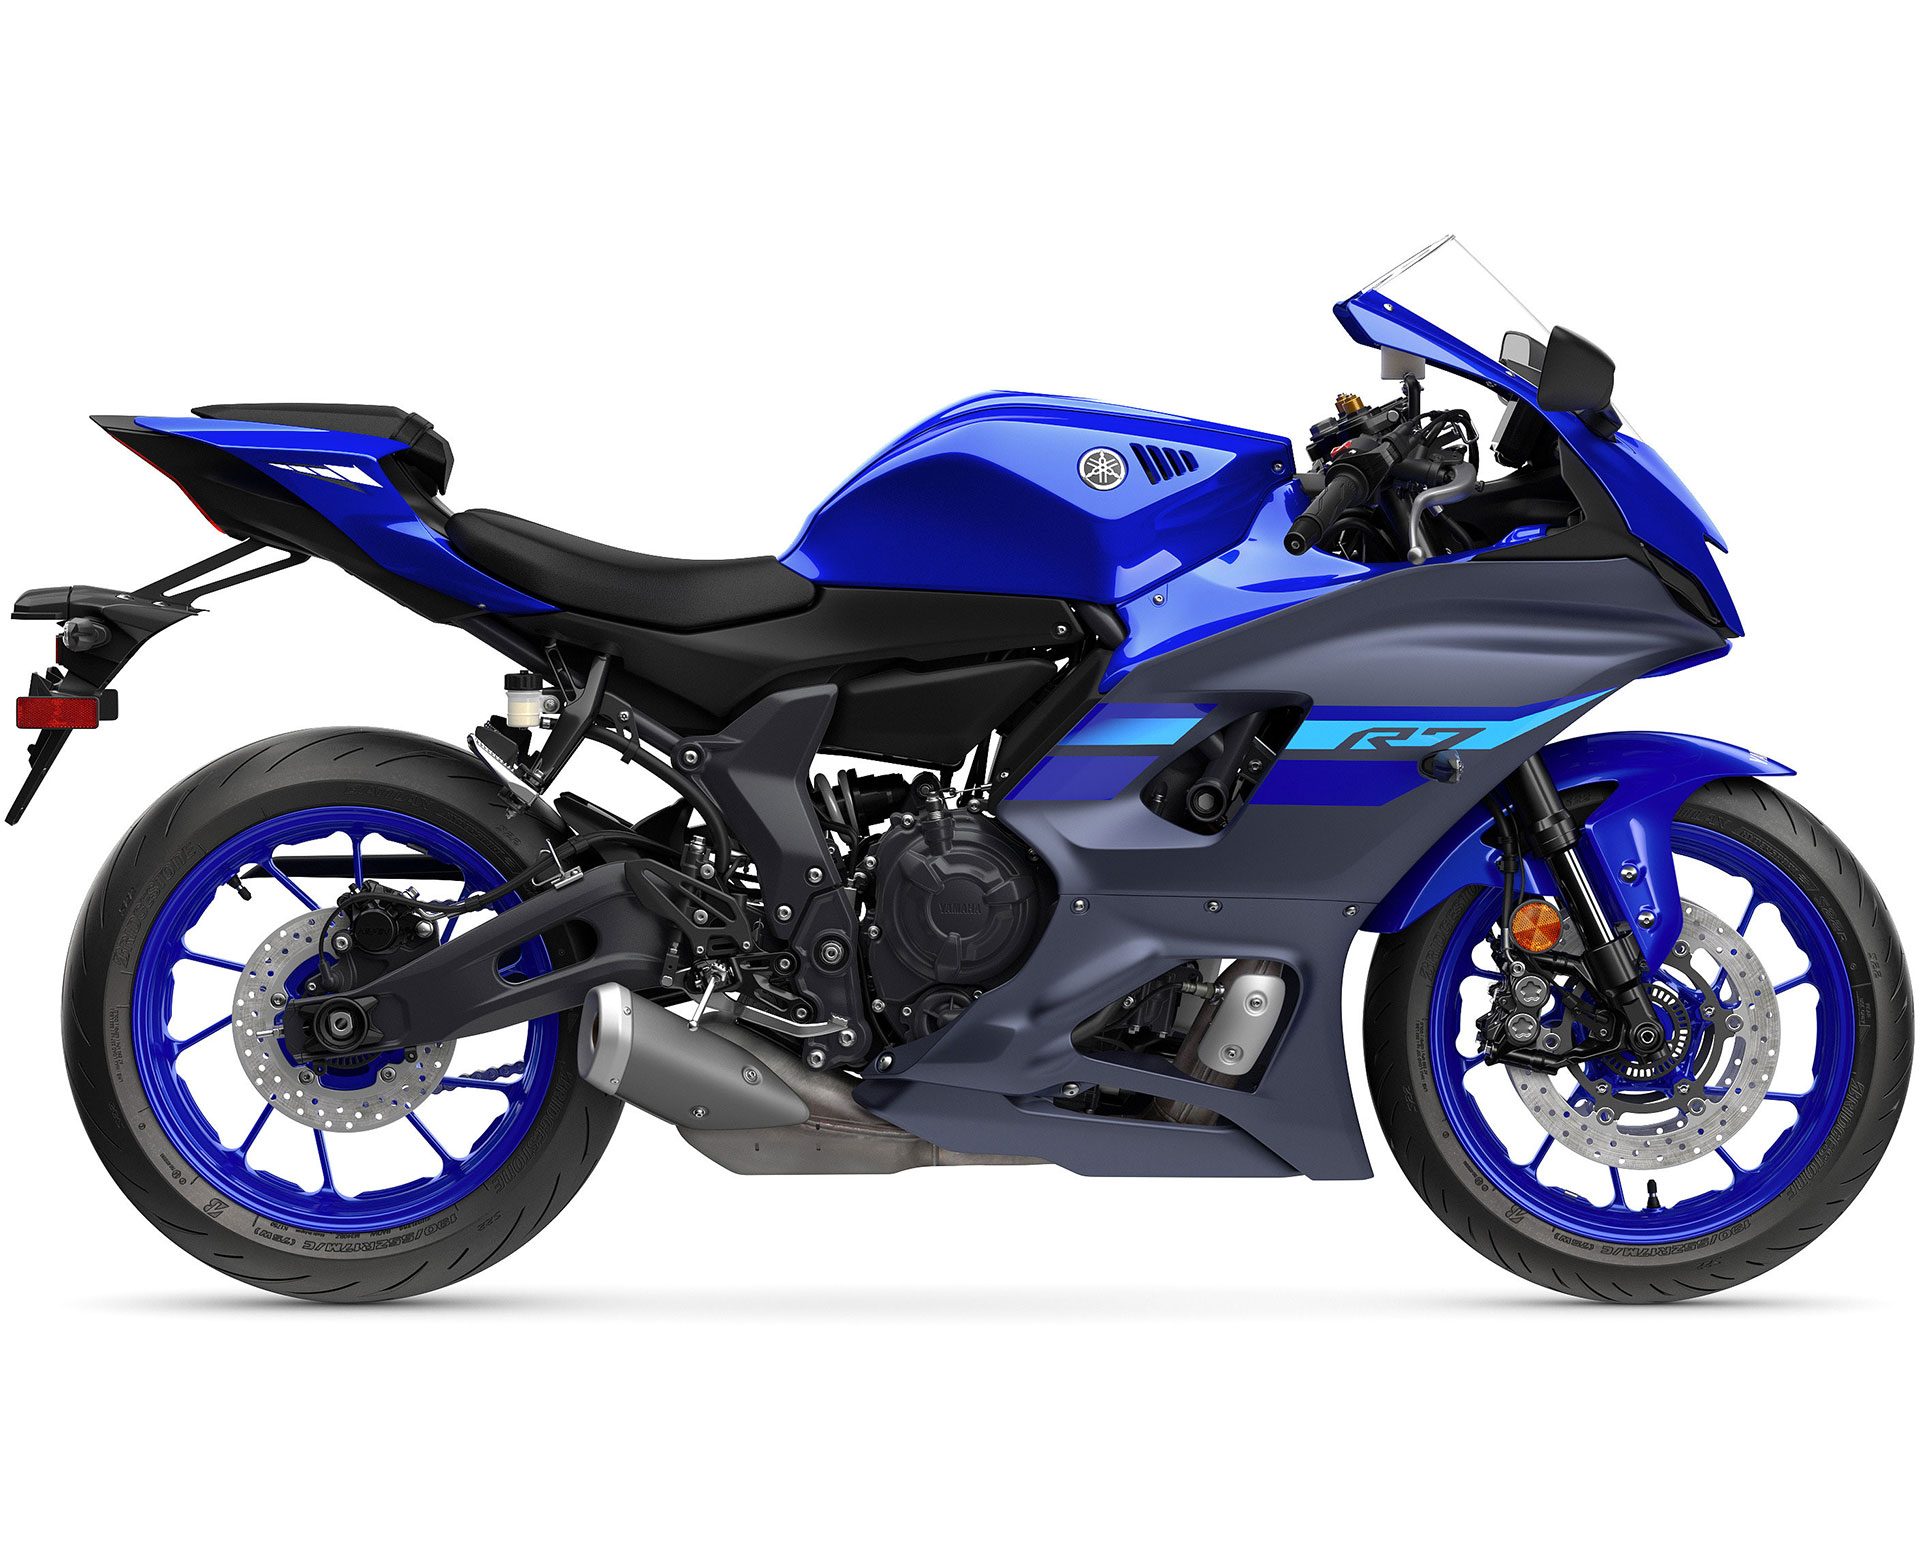 Thumbnail of your customized YZF-R7 2024